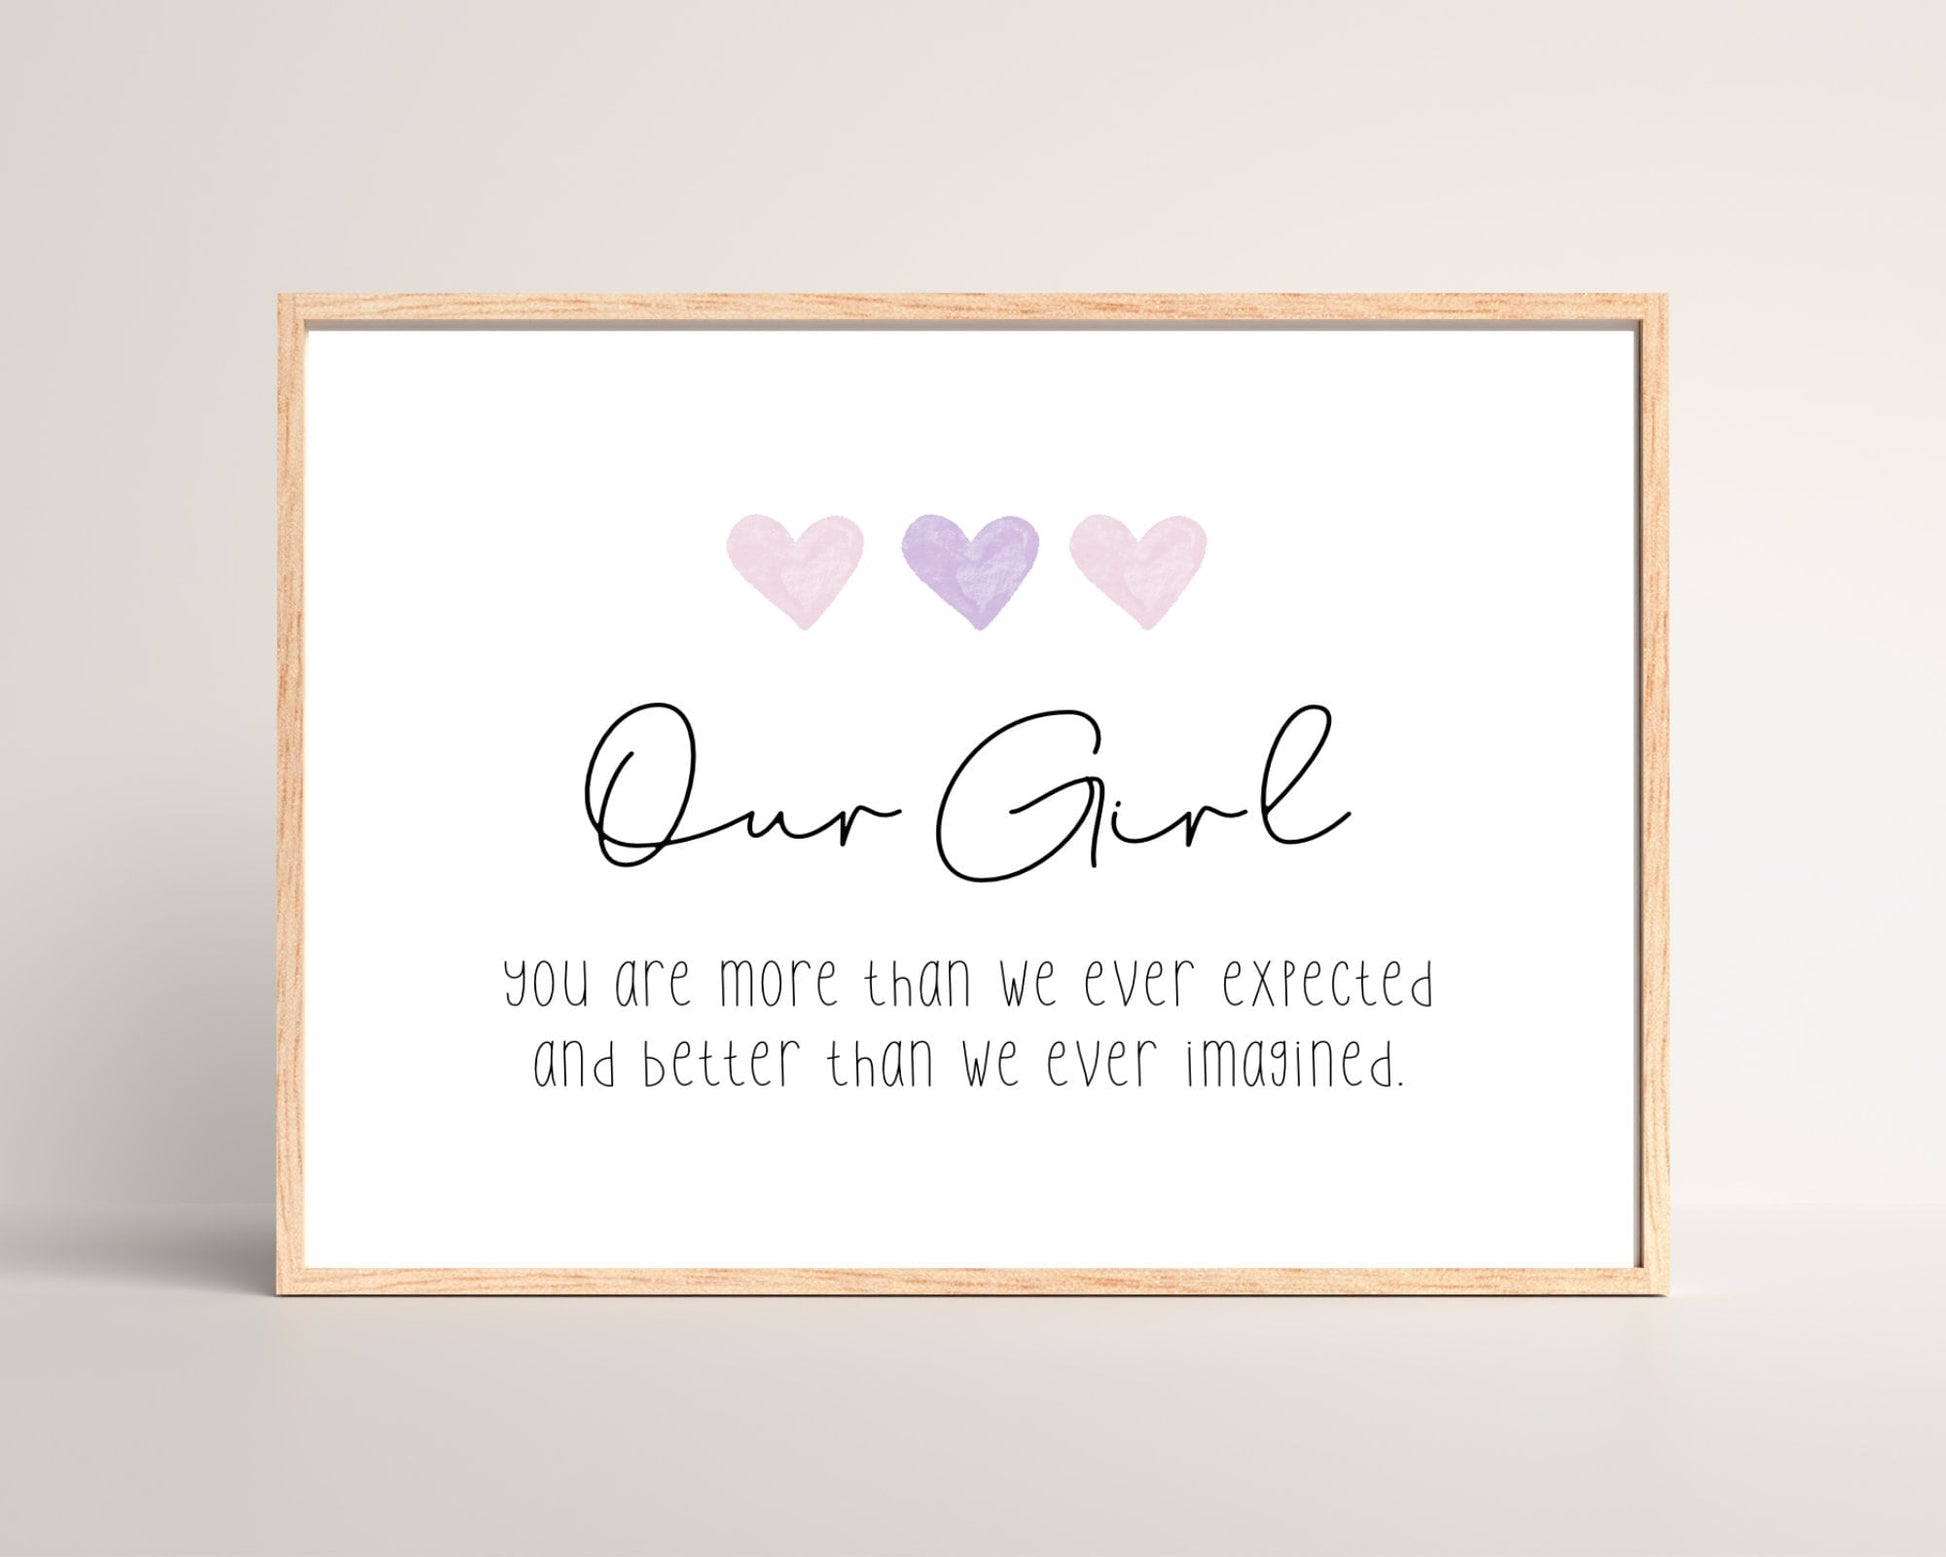 A little girl’s room digital print that has three pink hearts at the top, and a piece of writing that says: “Our girl, you are more than we ever expected and better than we ever imagined.”